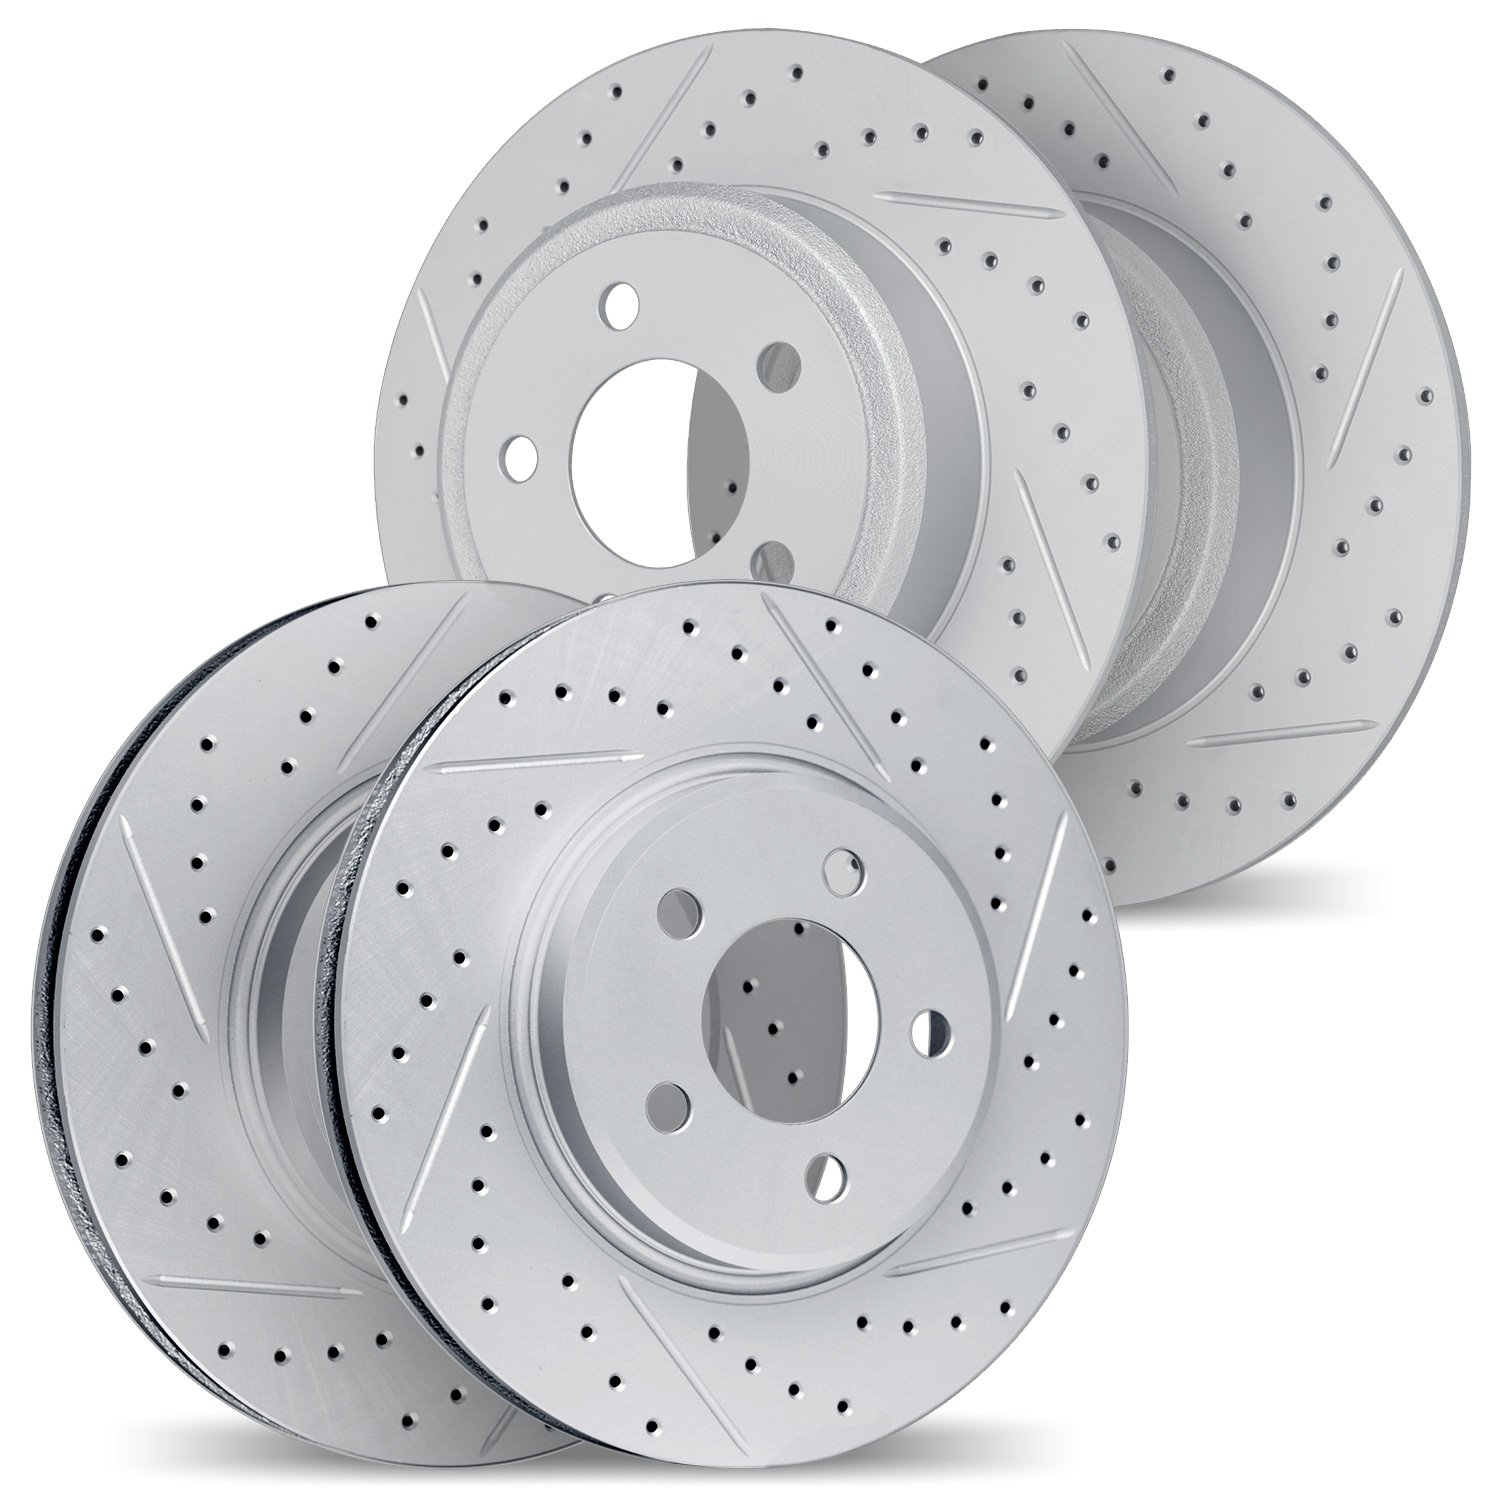 2004-58007 Geoperformance Drilled/Slotted Brake Rotors, Fits Select Acura/Honda, Position: Front and Rear